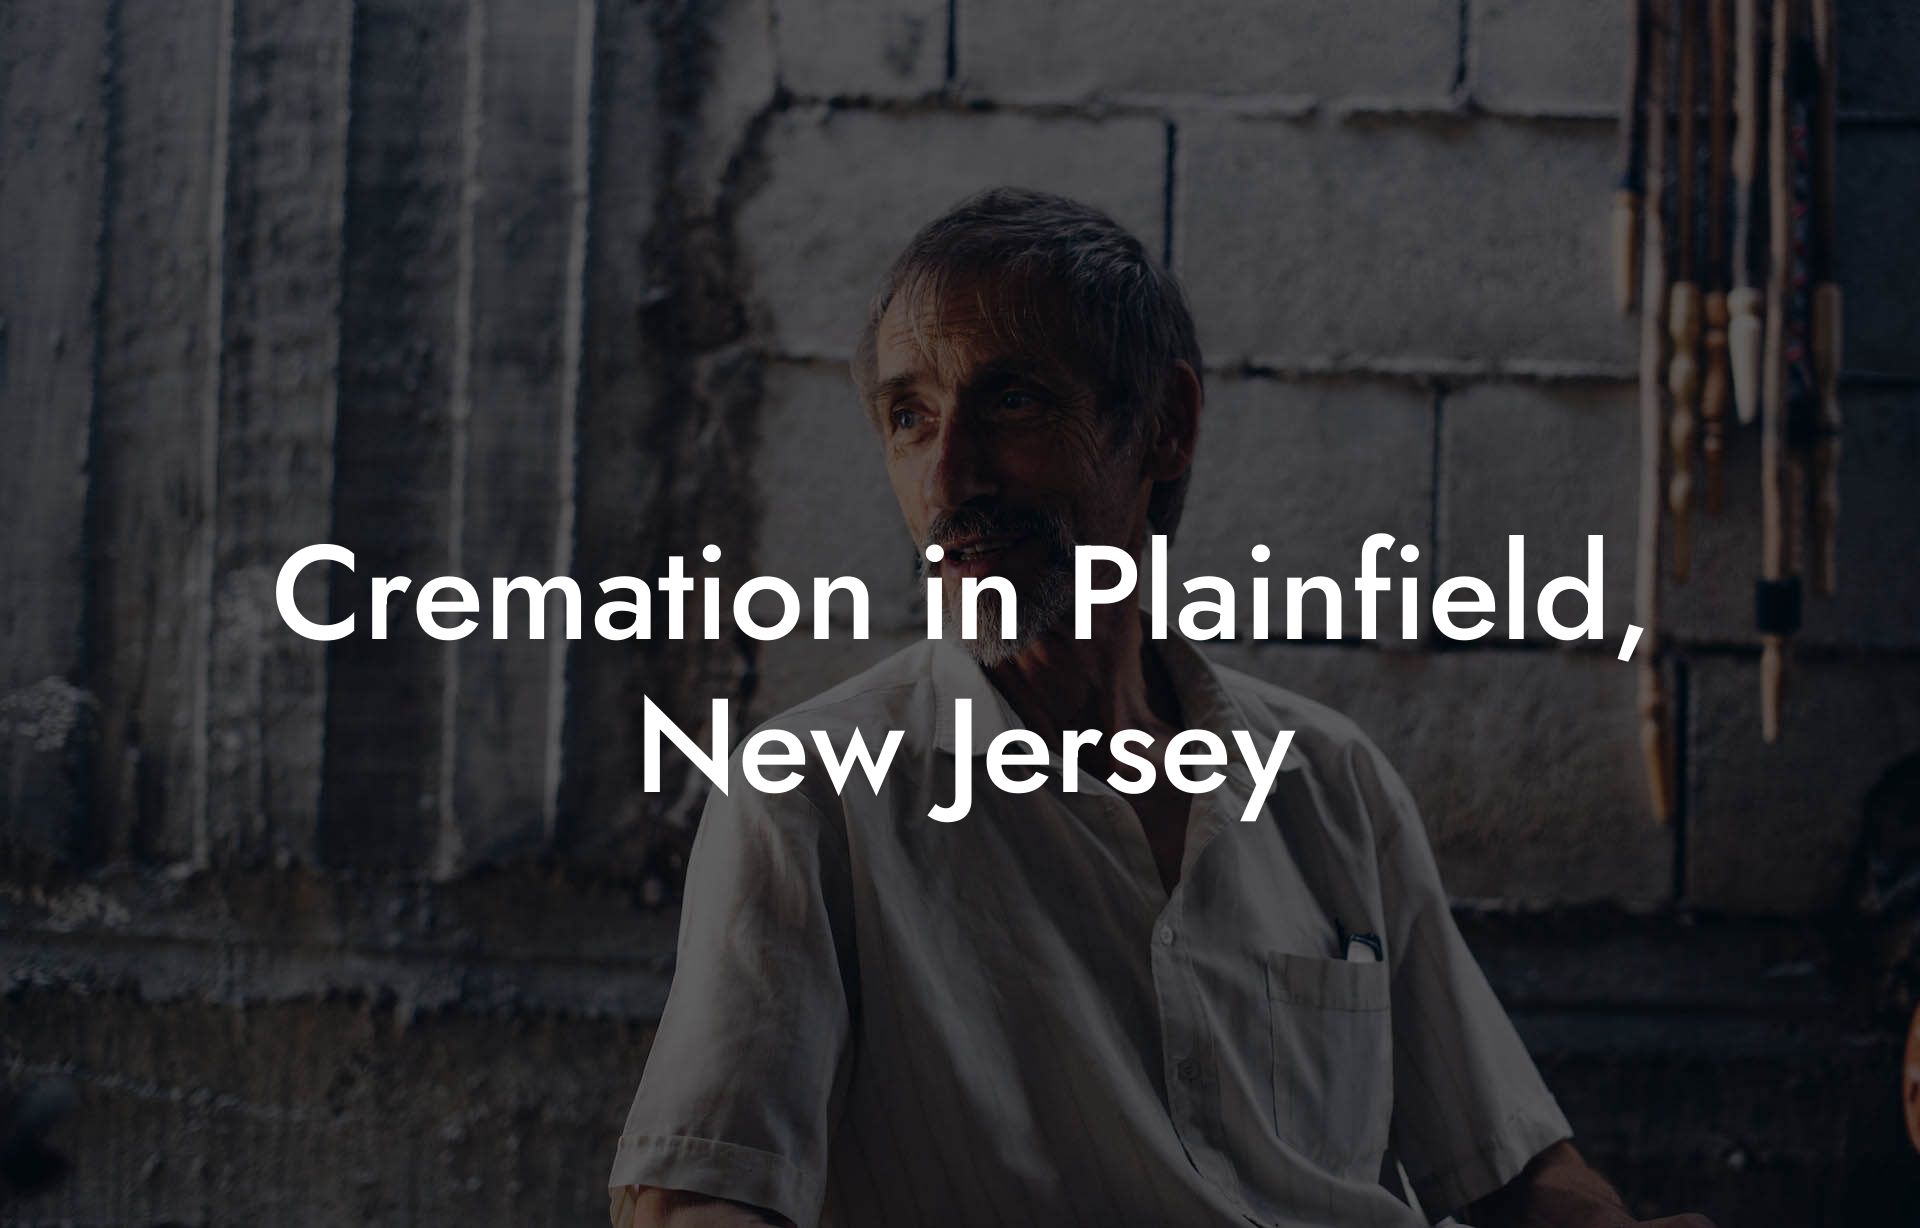 Cremation in Plainfield, New Jersey